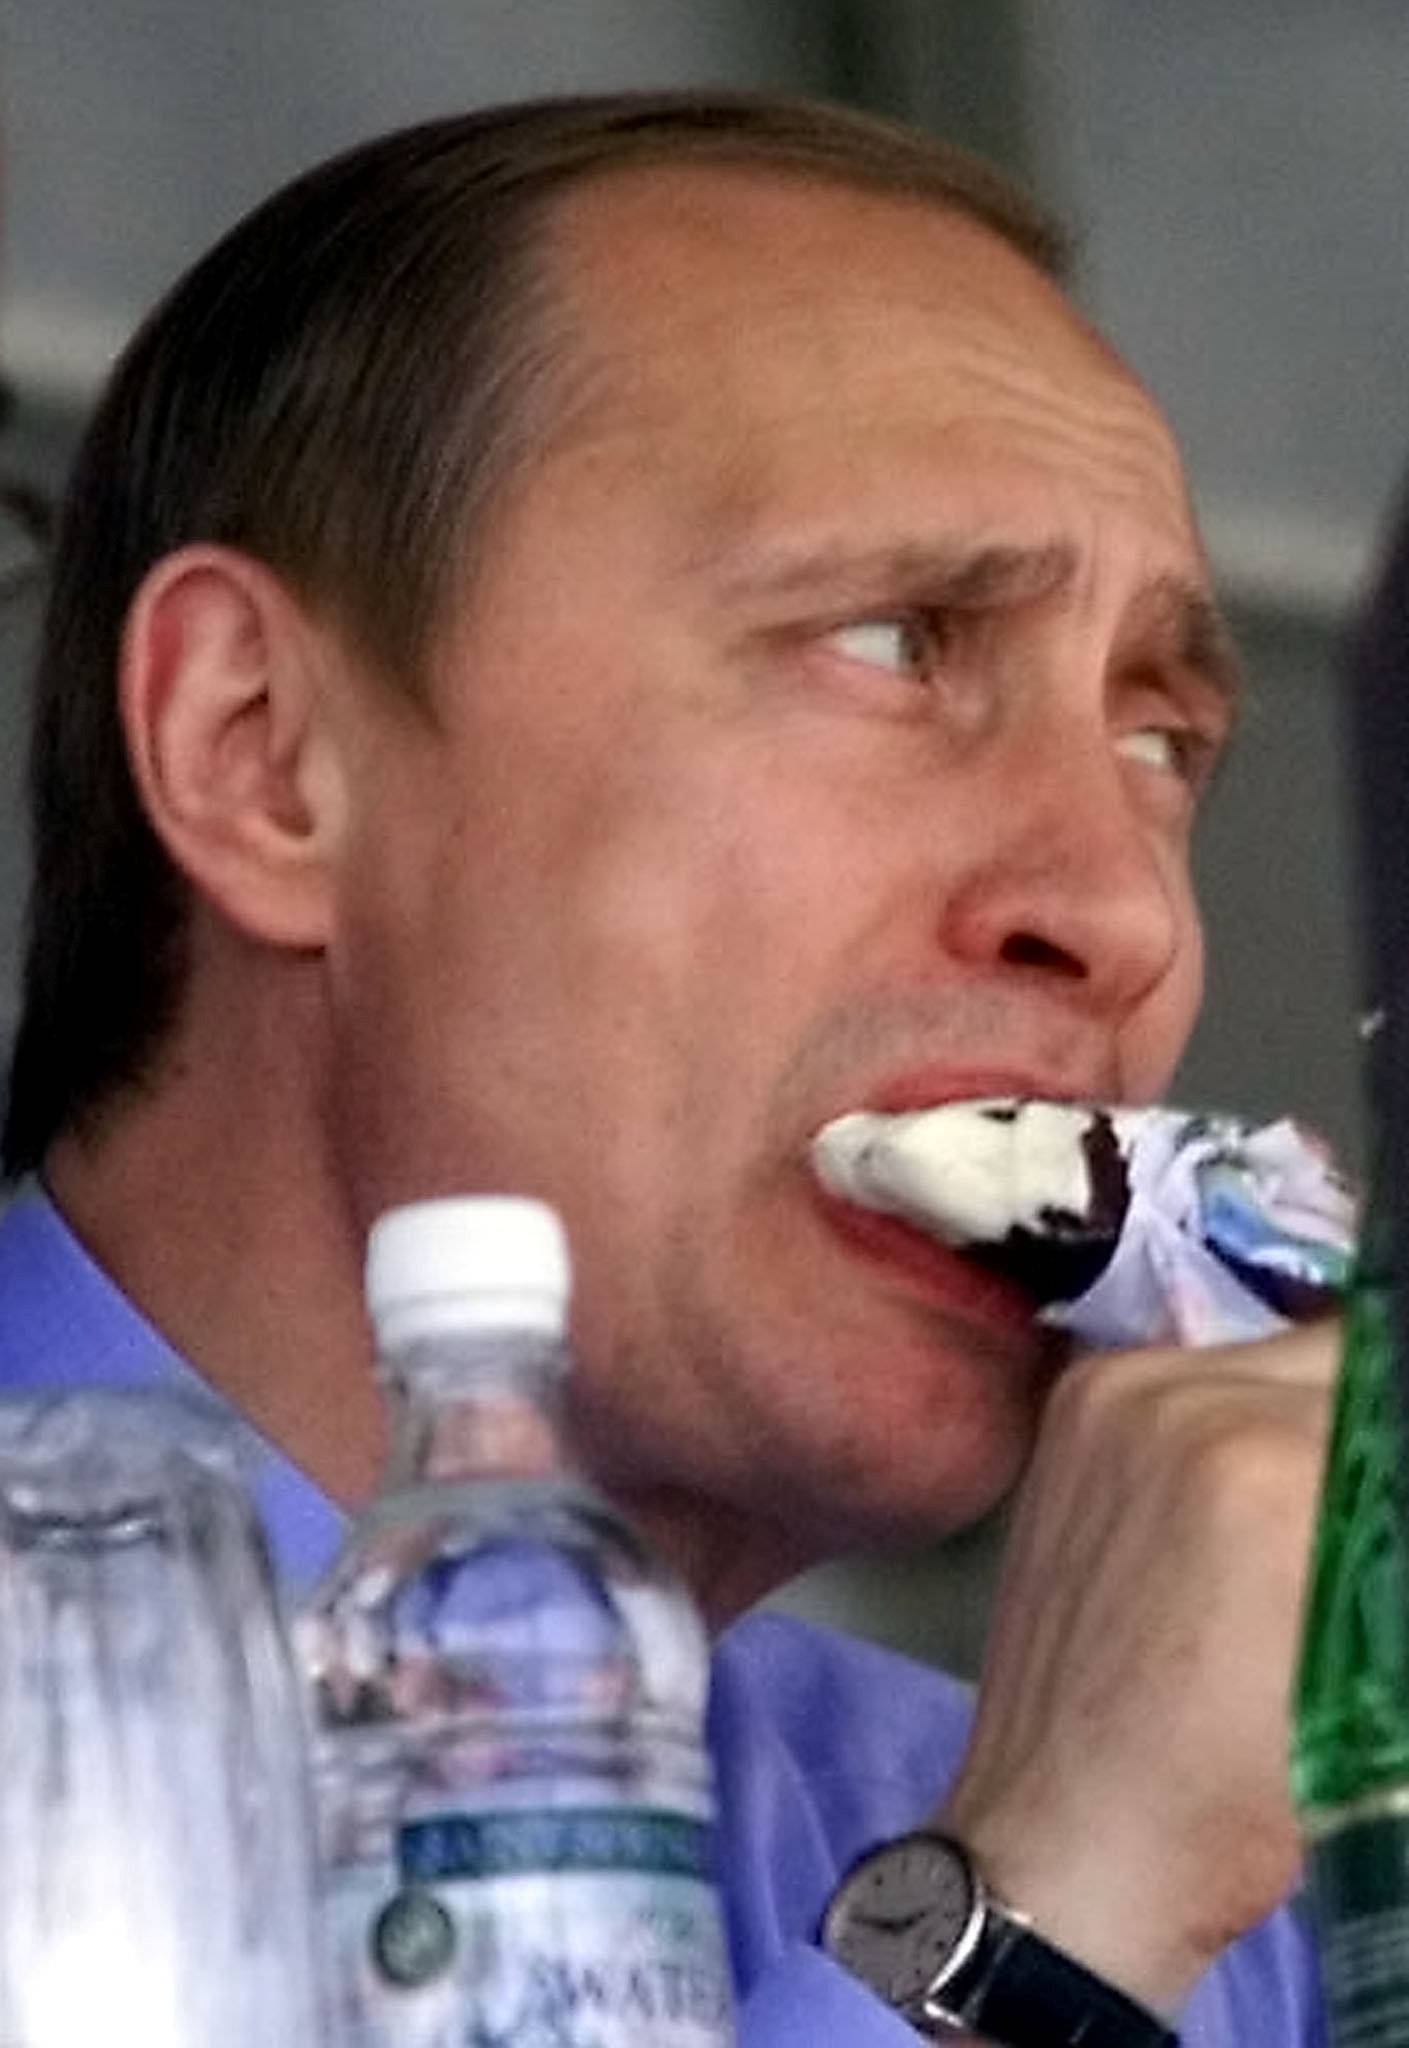 FILE PHOTO: Russian President Vladimir Putin eats an ice cream during a visit to a weapons exhibition in Nizhny Tagil